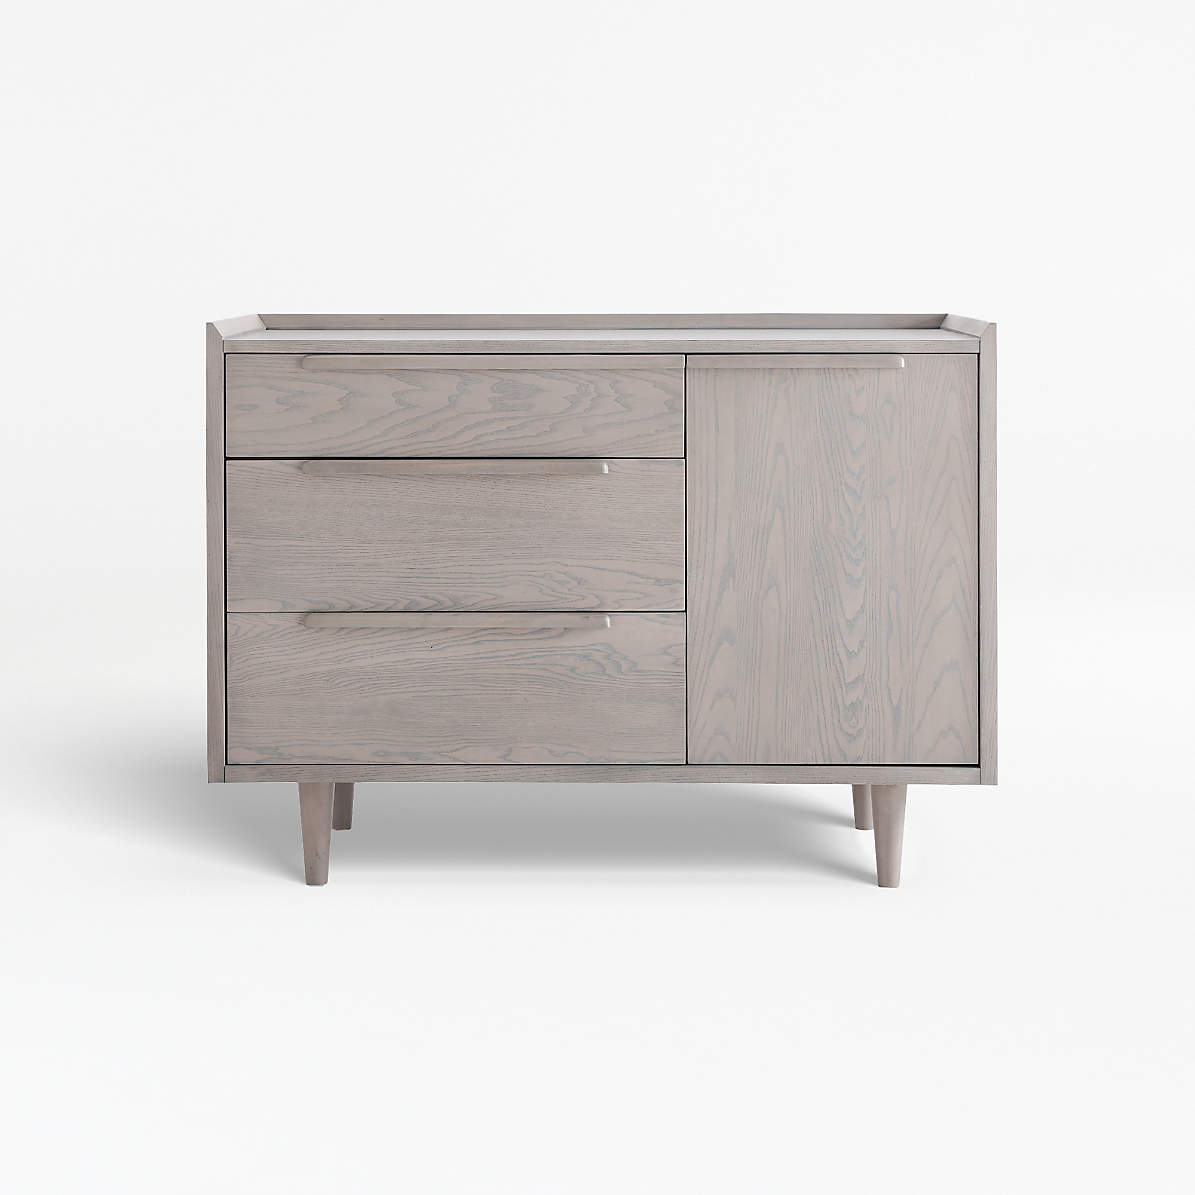 Tate Stone Small 3 Drawer Chest, Small 3 Drawer Dresser